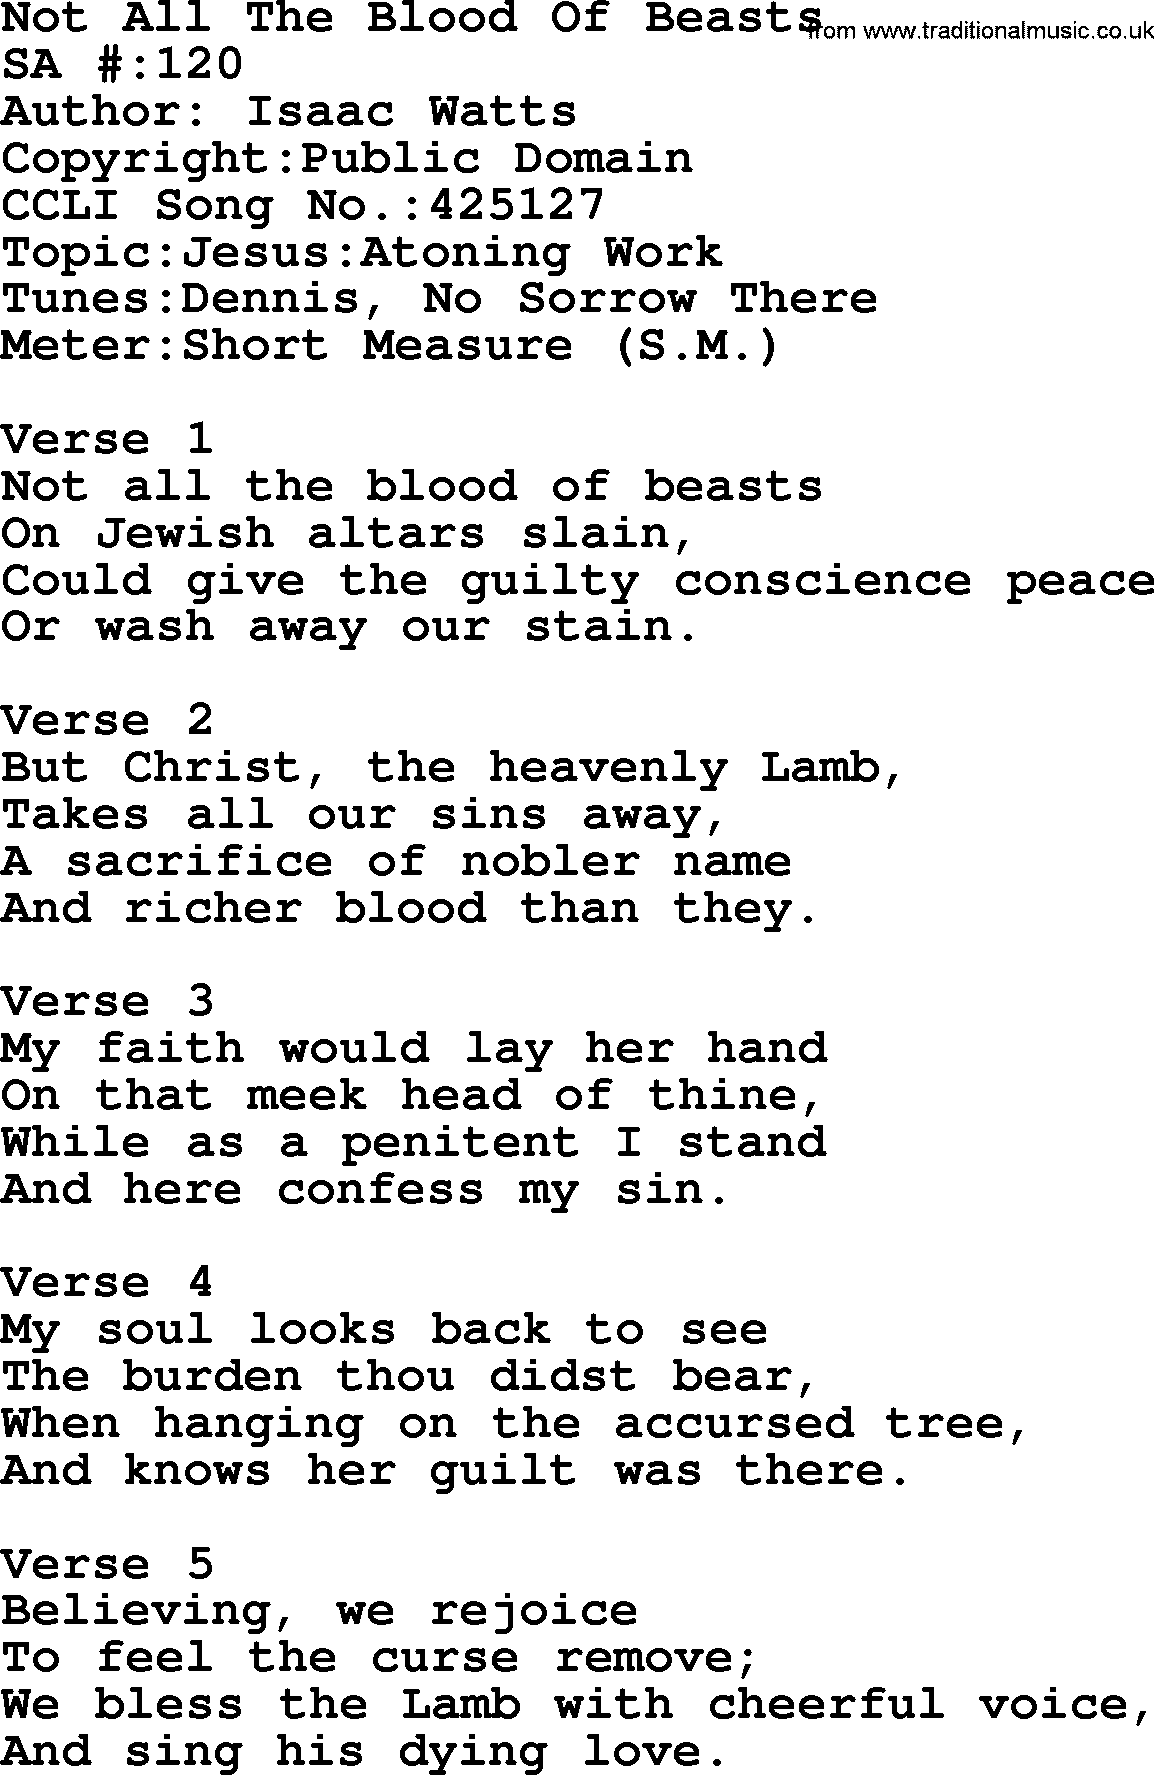 Salvation Army Hymnal, title: Not All The Blood Of Beasts, with lyrics and PDF,